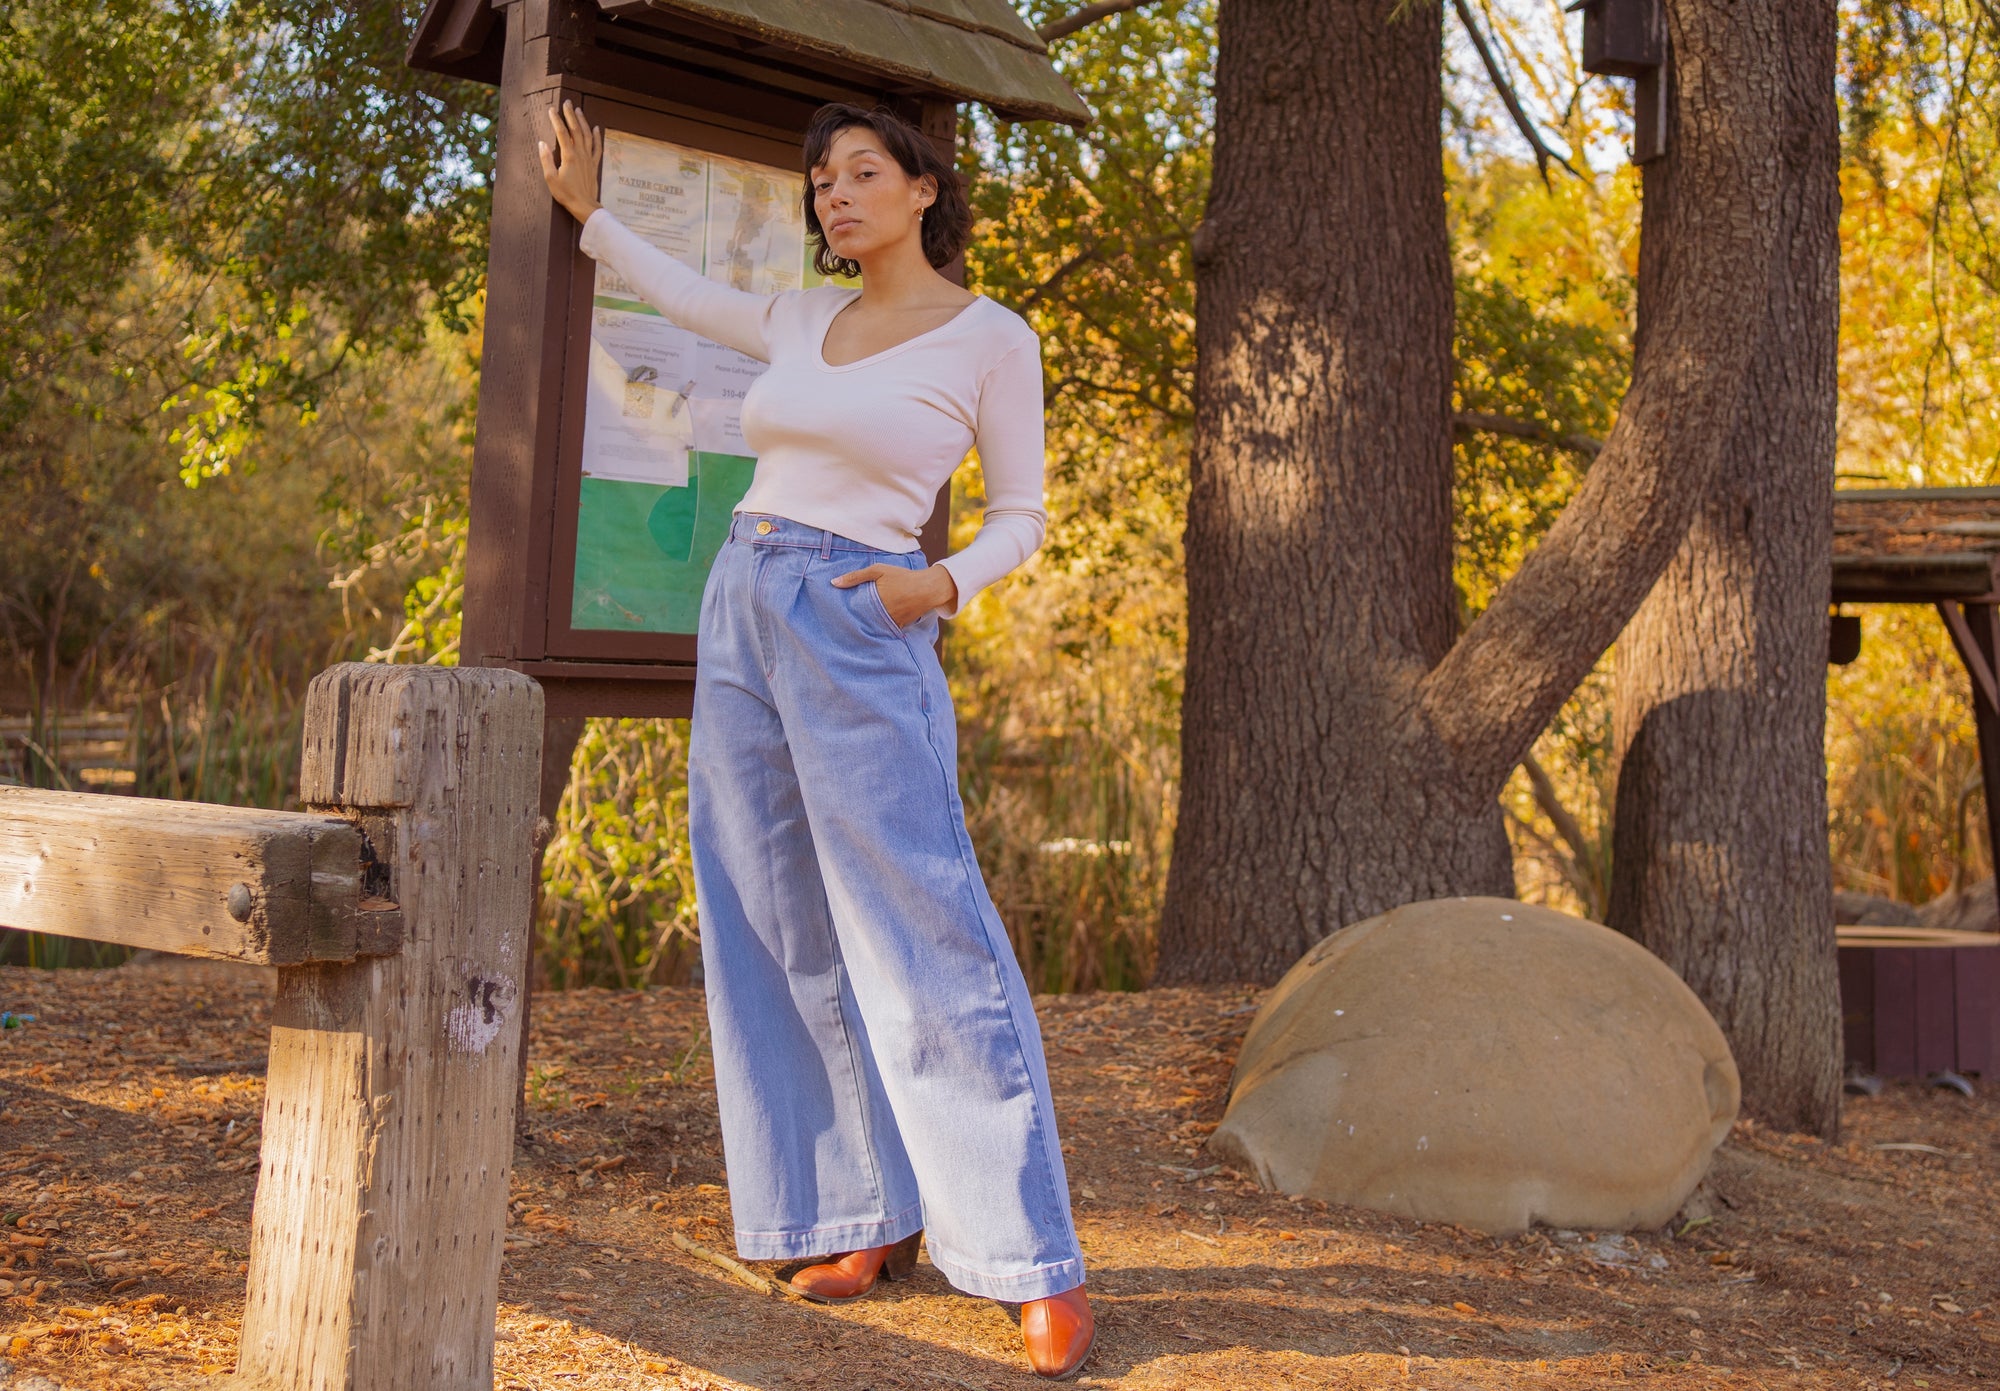 Tiara is wearing Indigo Wide Leg Trousers in Light Wash and Long Sleeve V-Neck Tee in Vintage Off-White